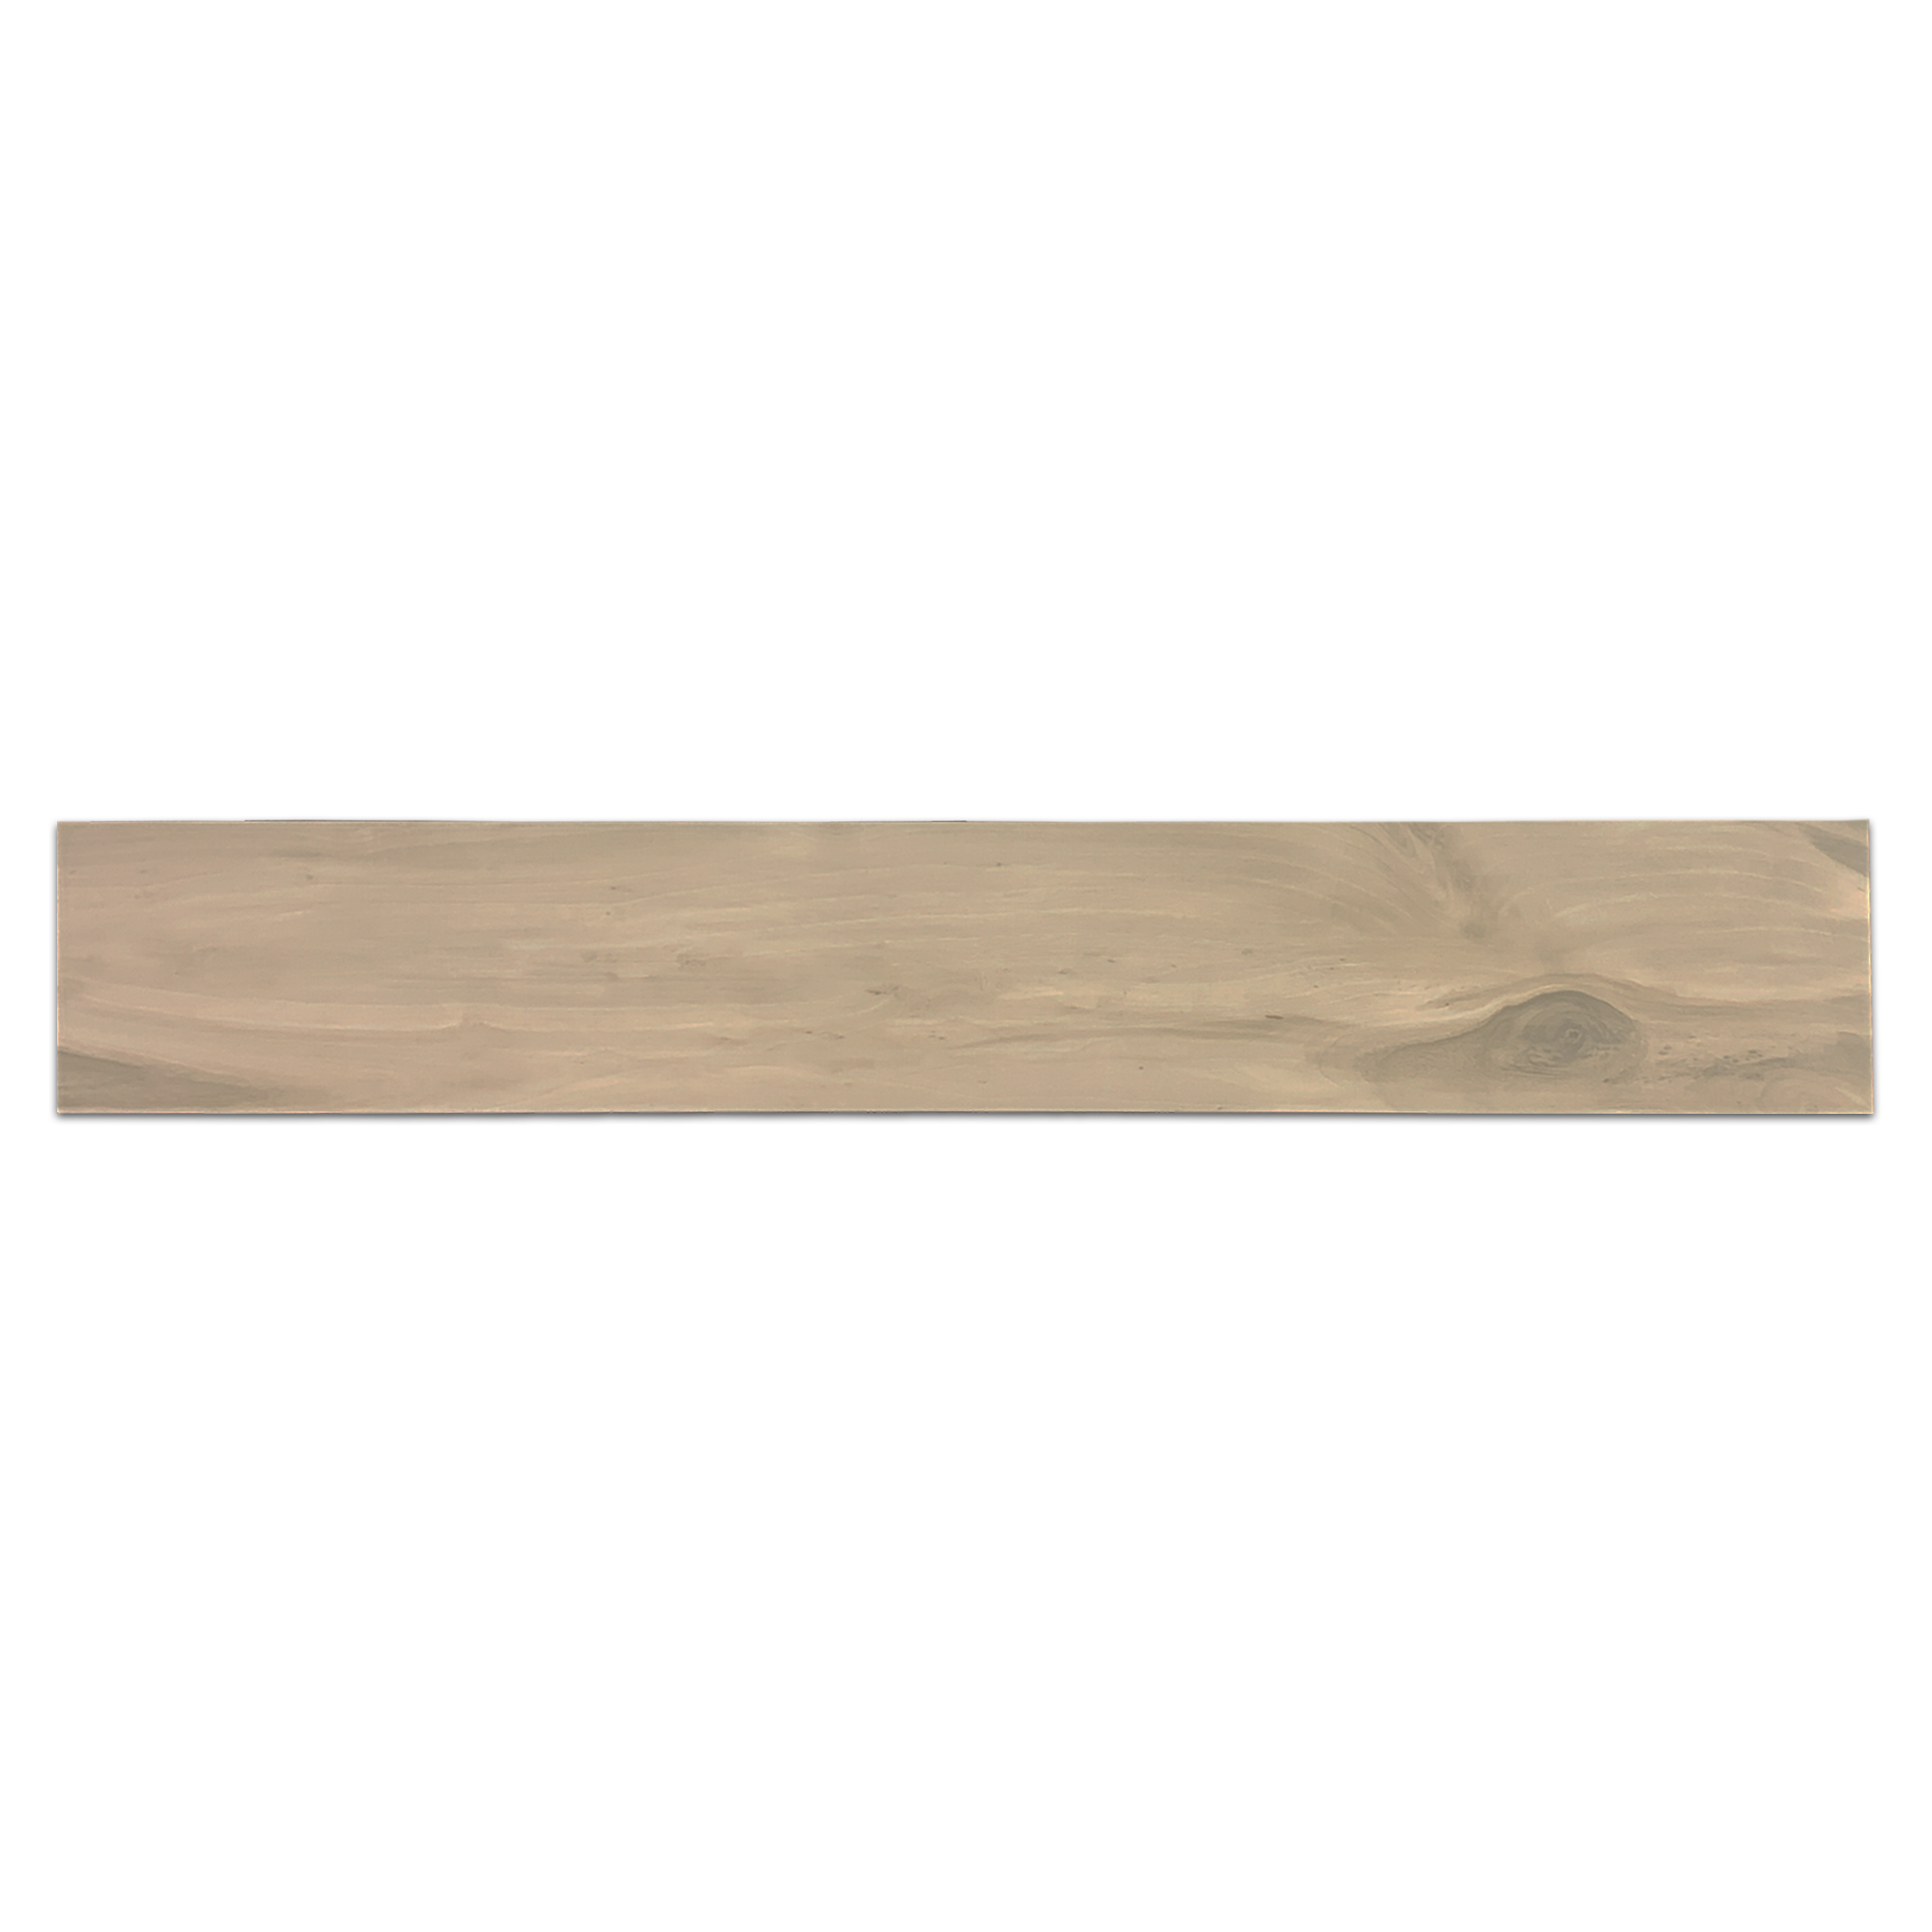 Elon Wood P Larice Porcelain Rectangle Field Tile 8x48x0.3125 Natural Pressed WP100 Surface Group International Product